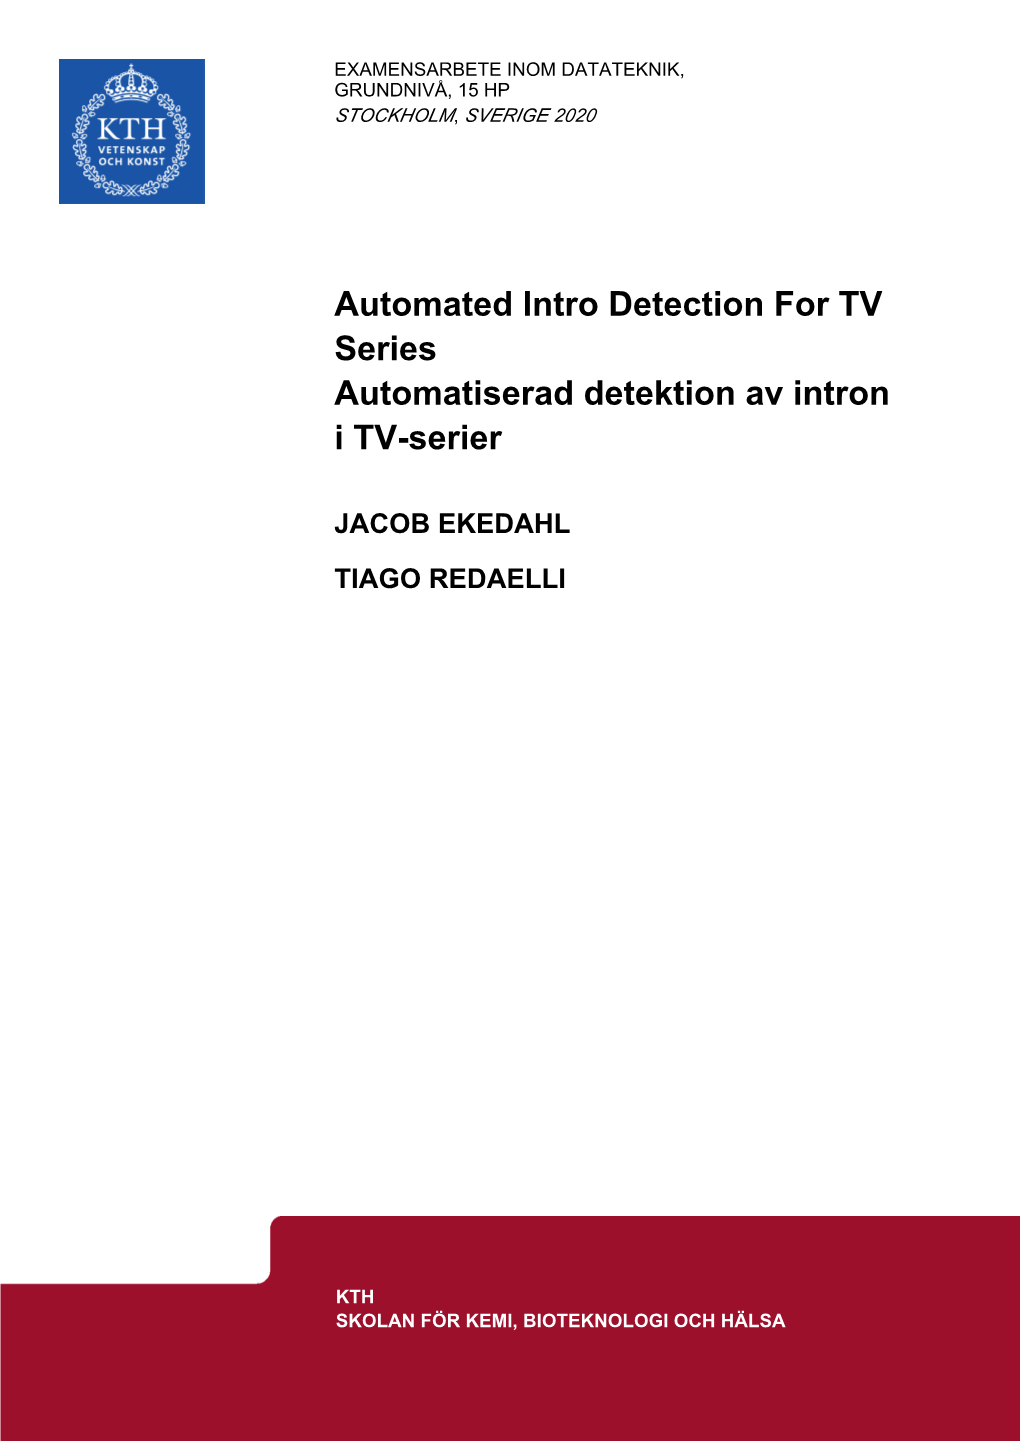 Automated Intro Detection for TV Series Automatiserad Detektion Av Intron I TV-Serier